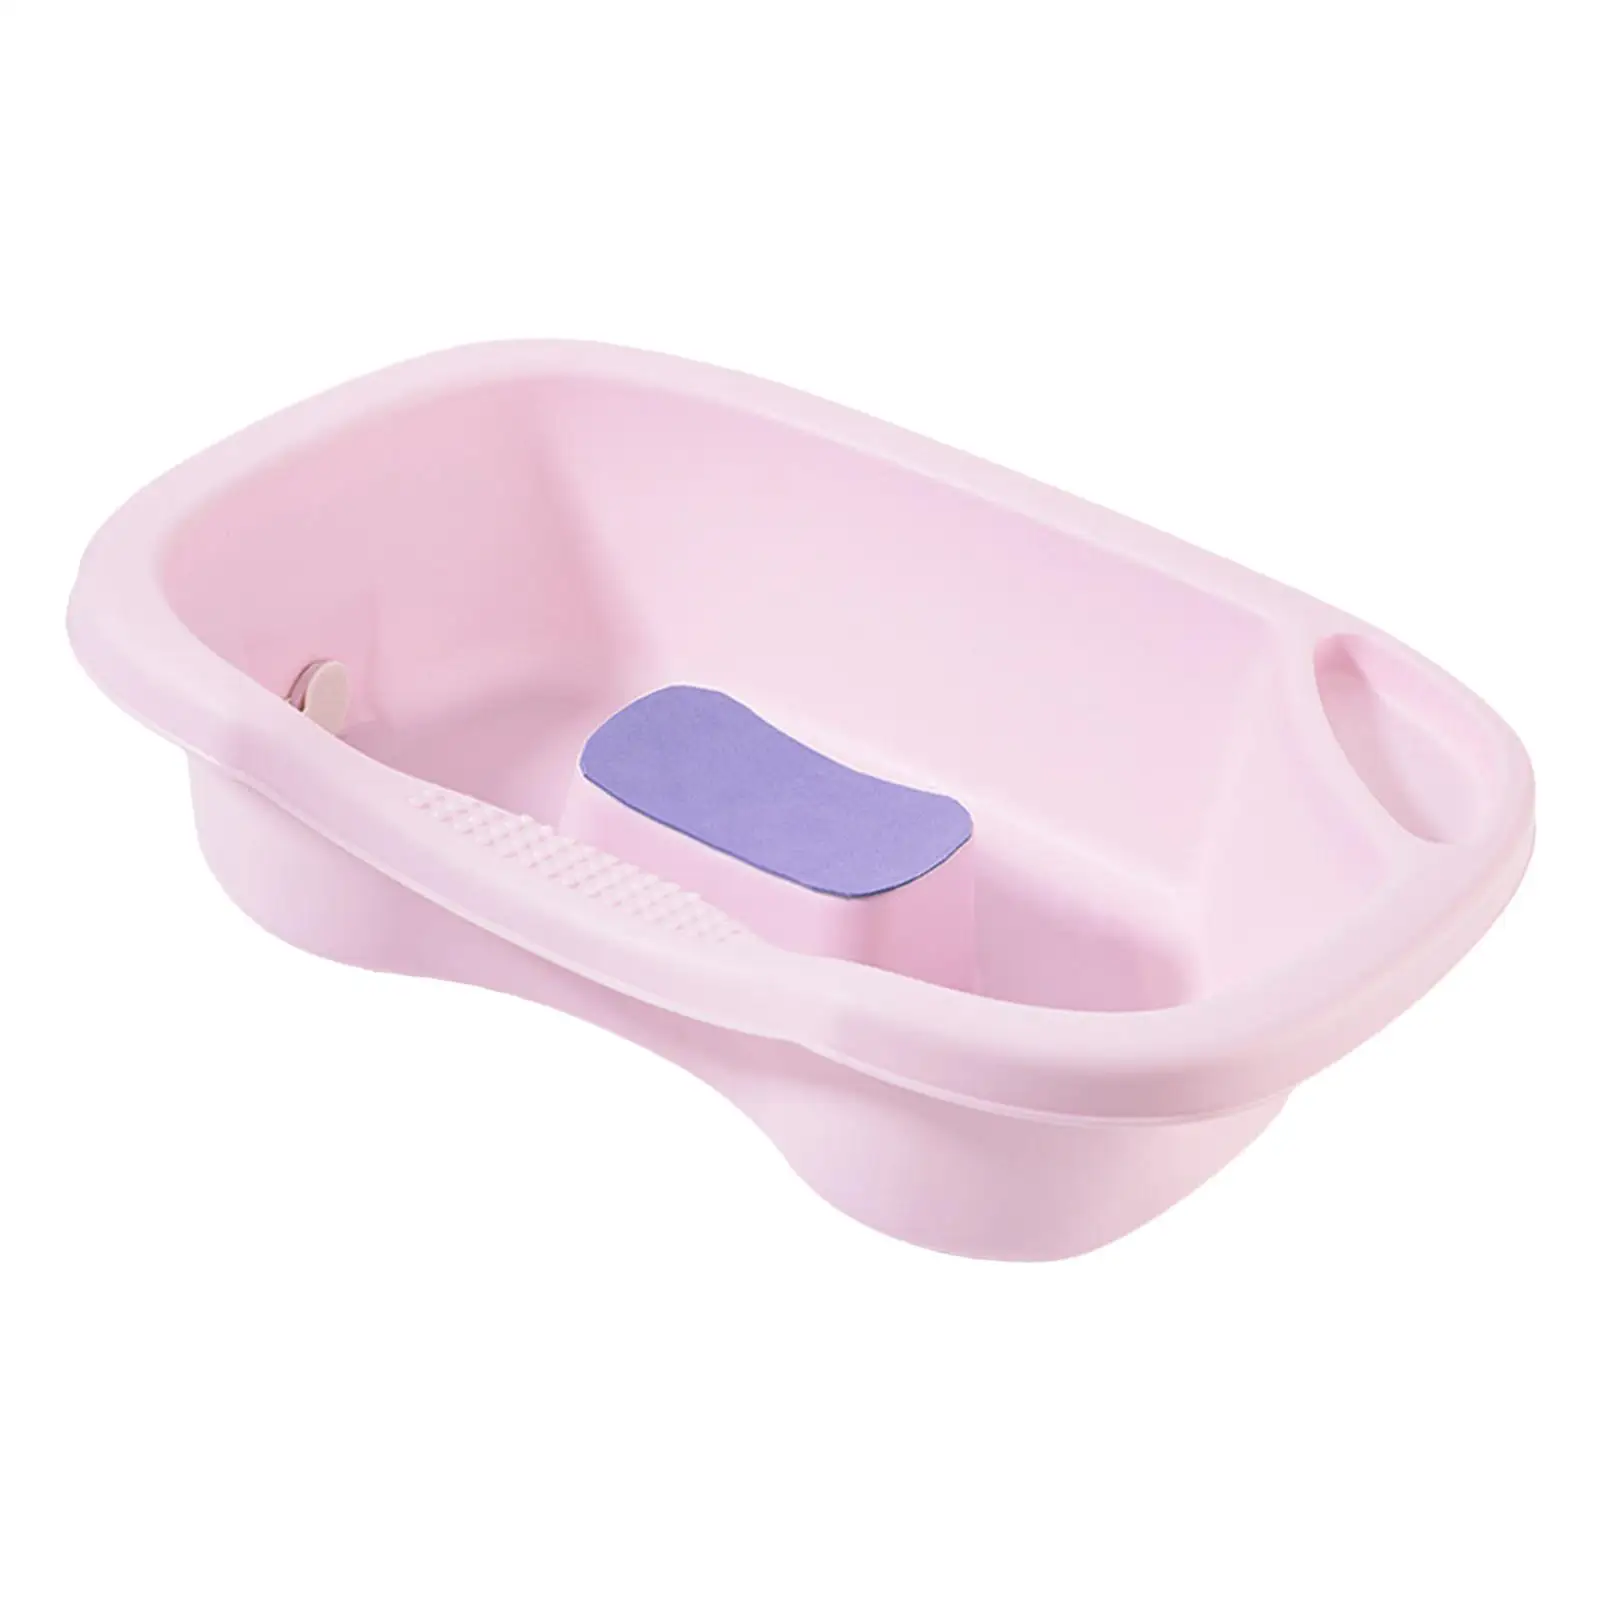 Portable Bed Shampoo Basin with Drain Hose with  Stable Tray Bowl for Hair Washing Hairdresser Bedridden Pregnant Disabled